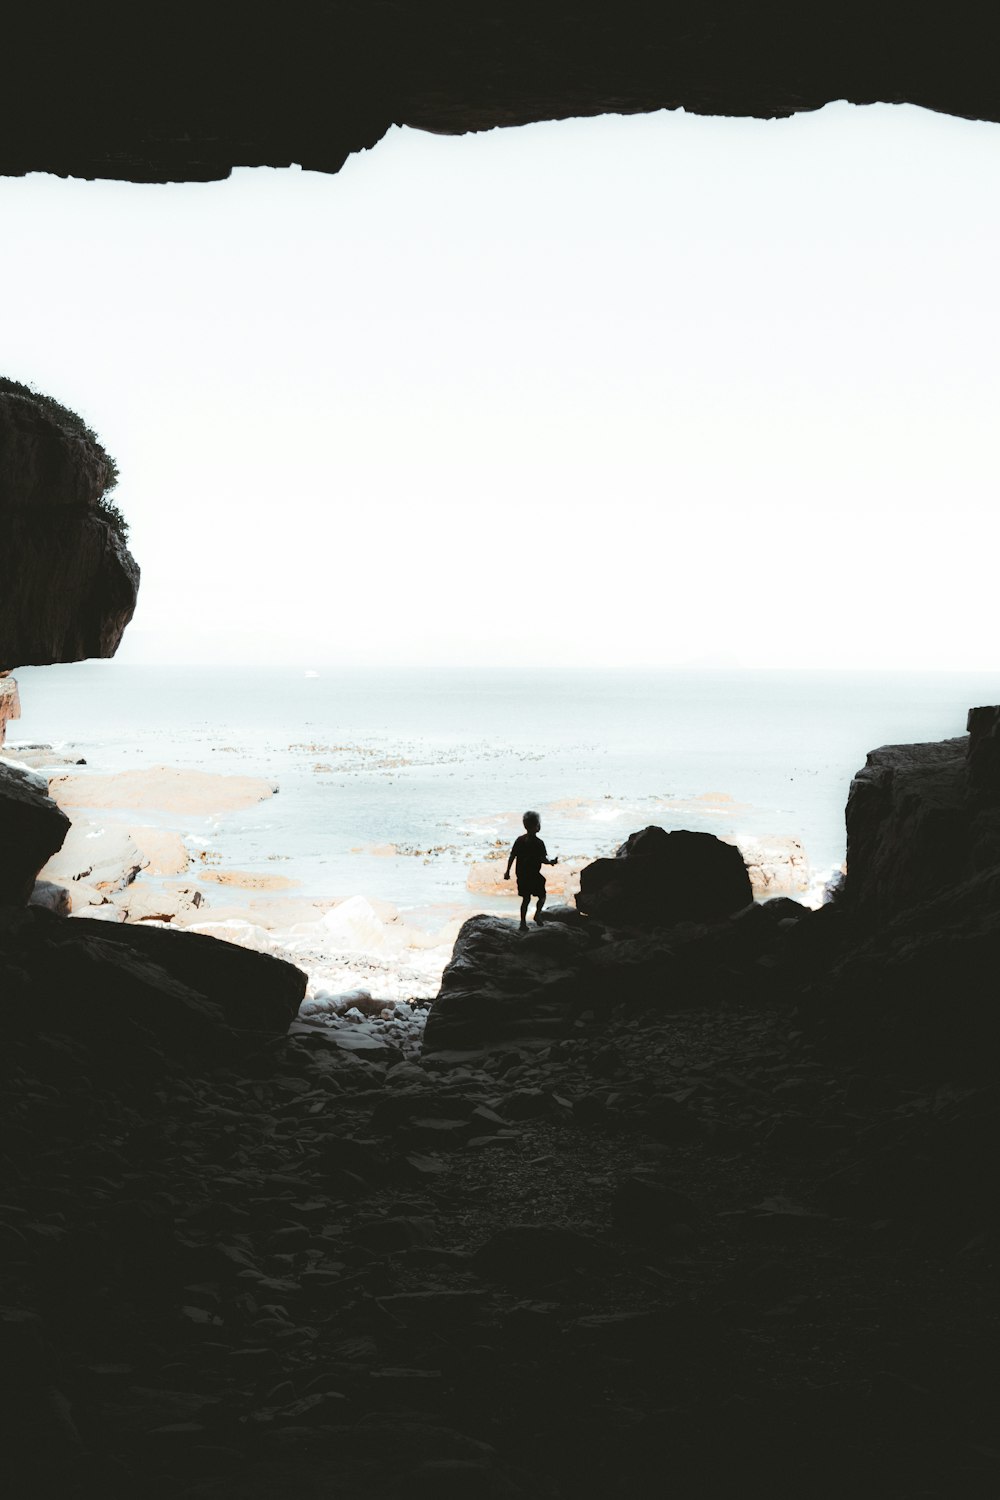 a person standing on a rocky beach